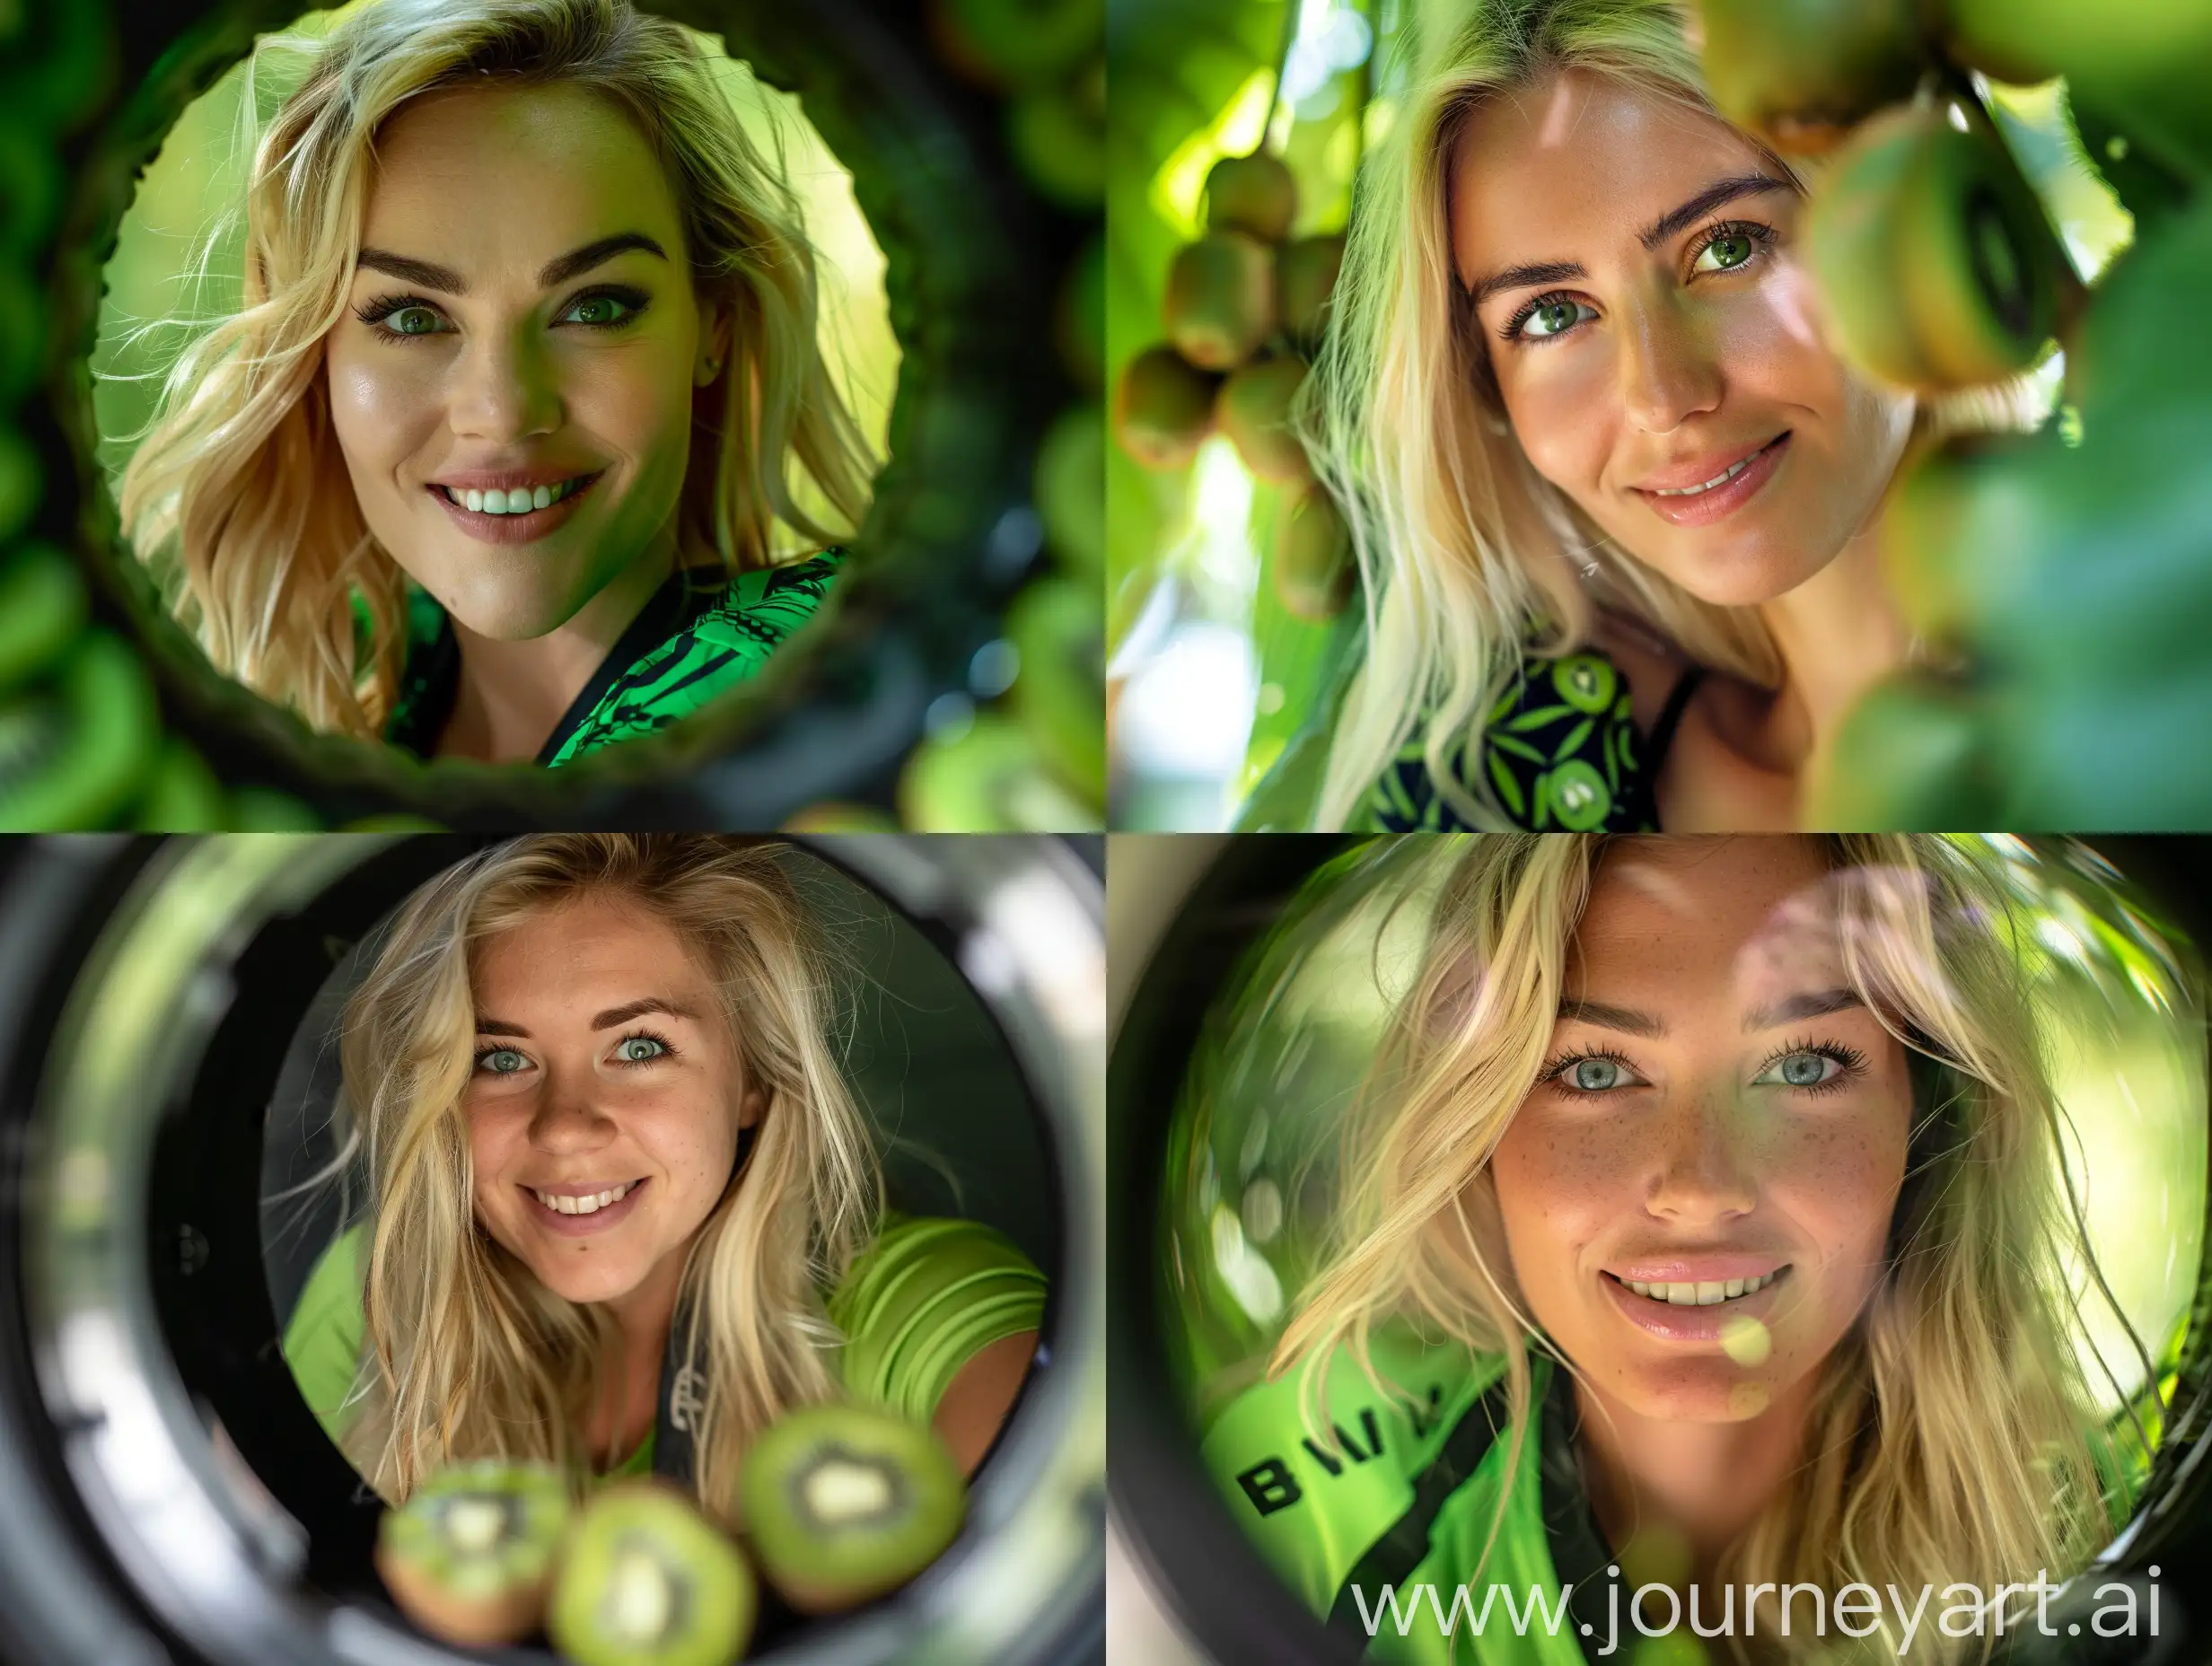 Real photo of a beautiful blonde woman. happy face Looking through the camera lens. Green and black clothes. A few kiwis in the picture